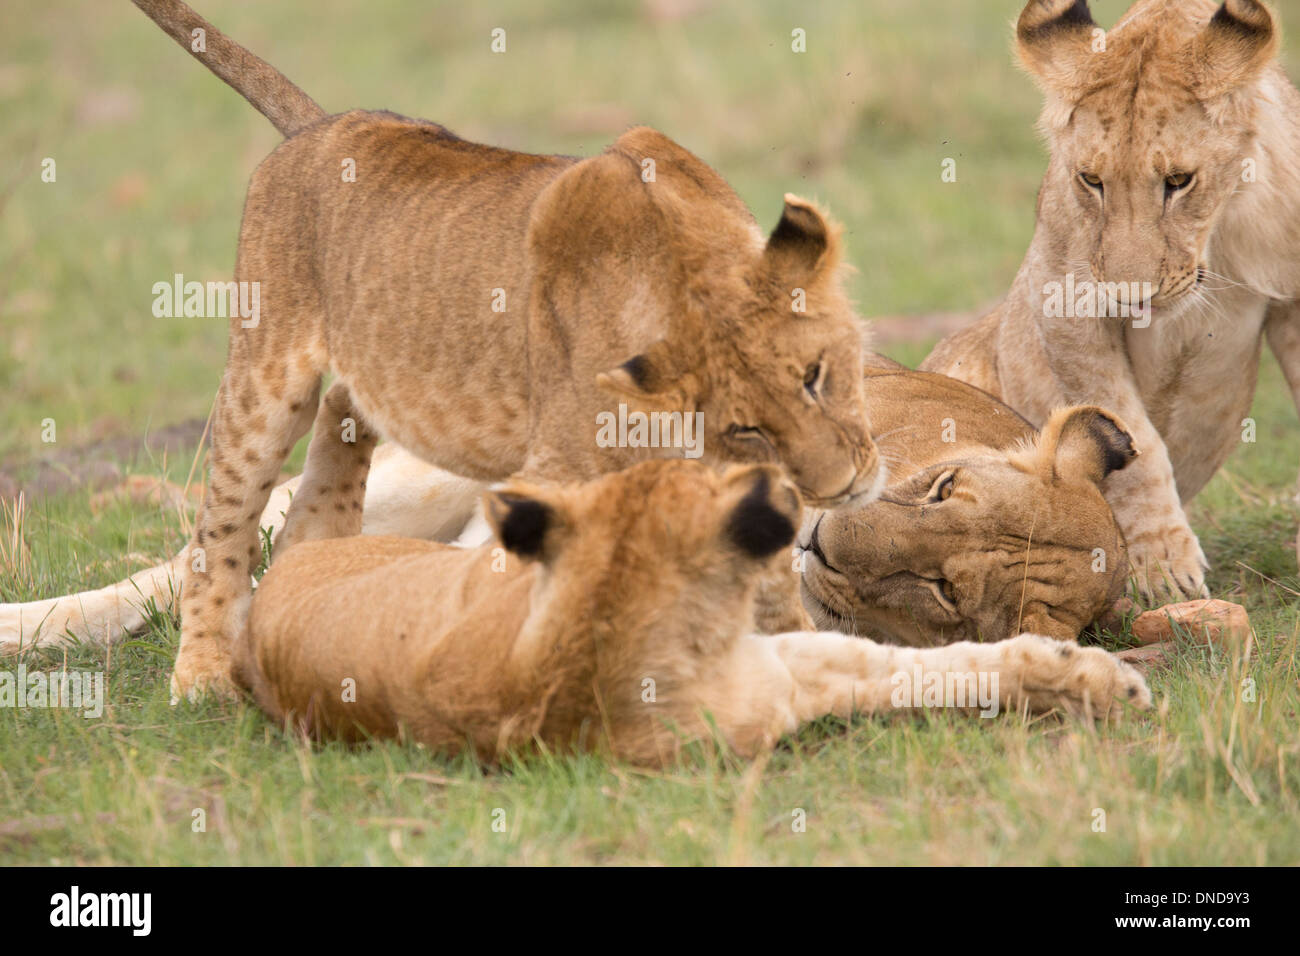 Cheeky lion cubs taking time out to play with a lioness taken in the Masai Mara Game Reserve in Kenya, Africa in October 2013 Stock Photo